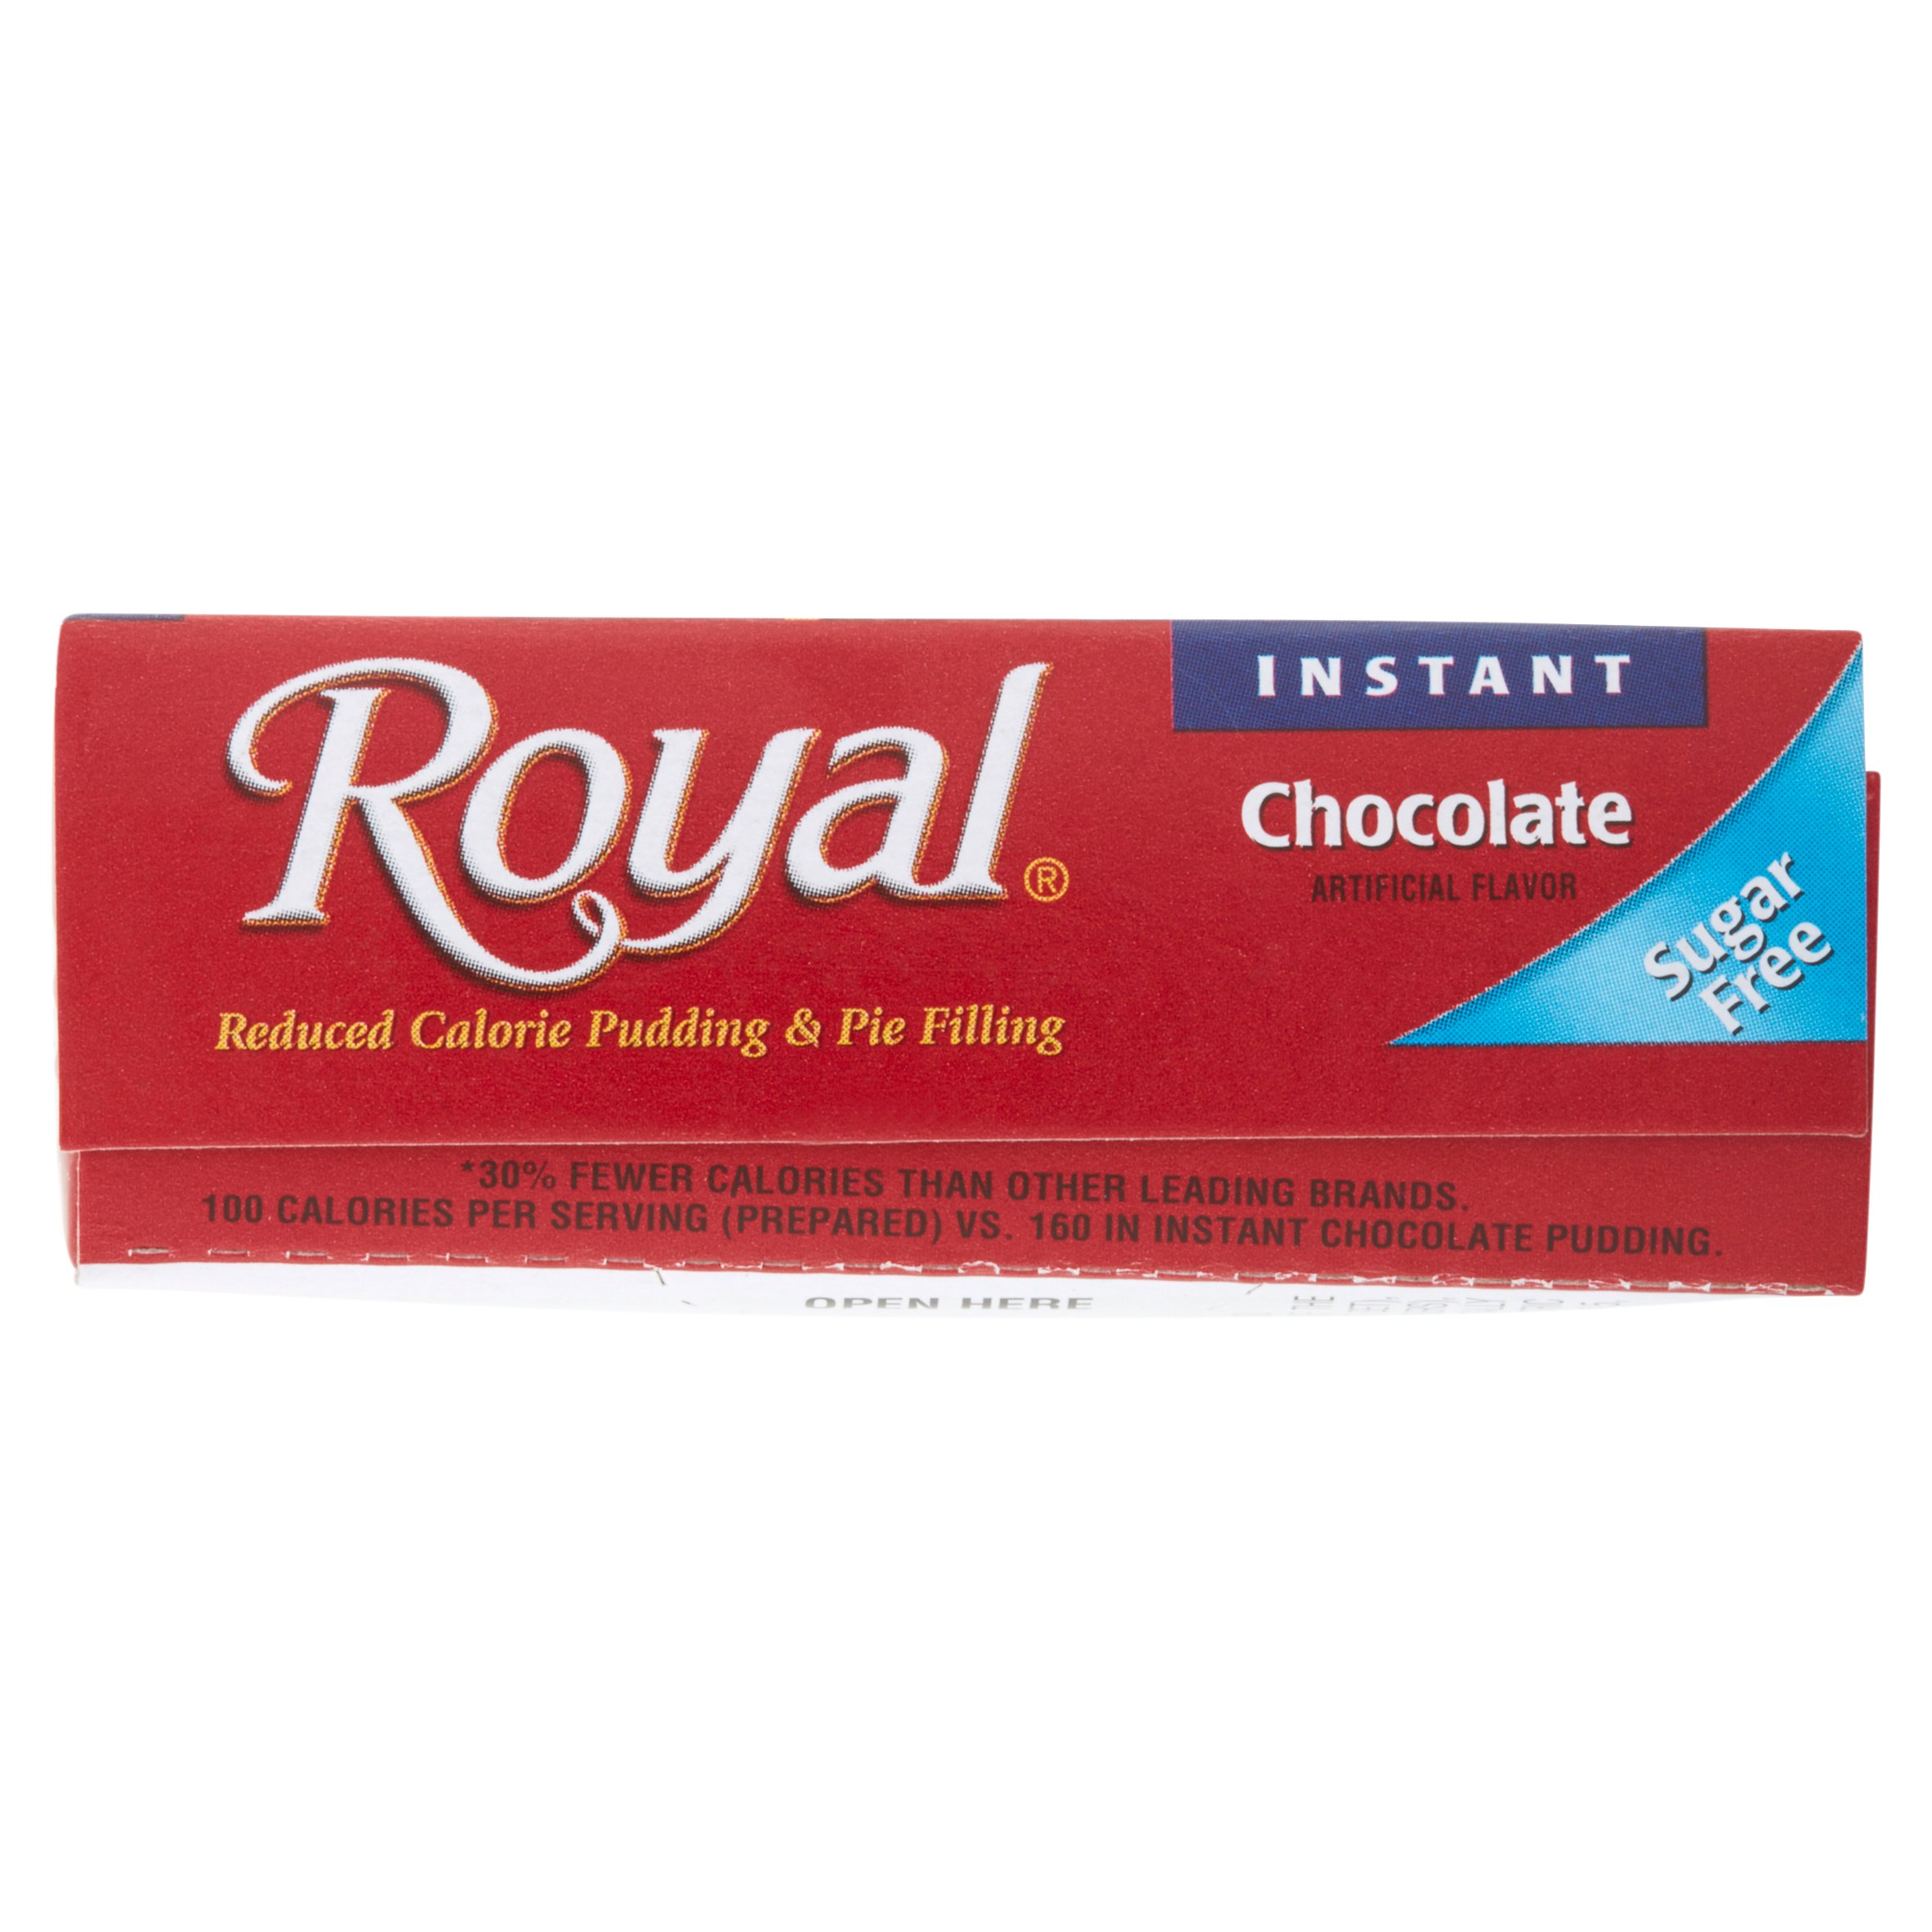 Royal Instant Sugar Free Chocolate Reduced Calorie Pudding & Pie Filling, 1.7 oz - image 3 of 5